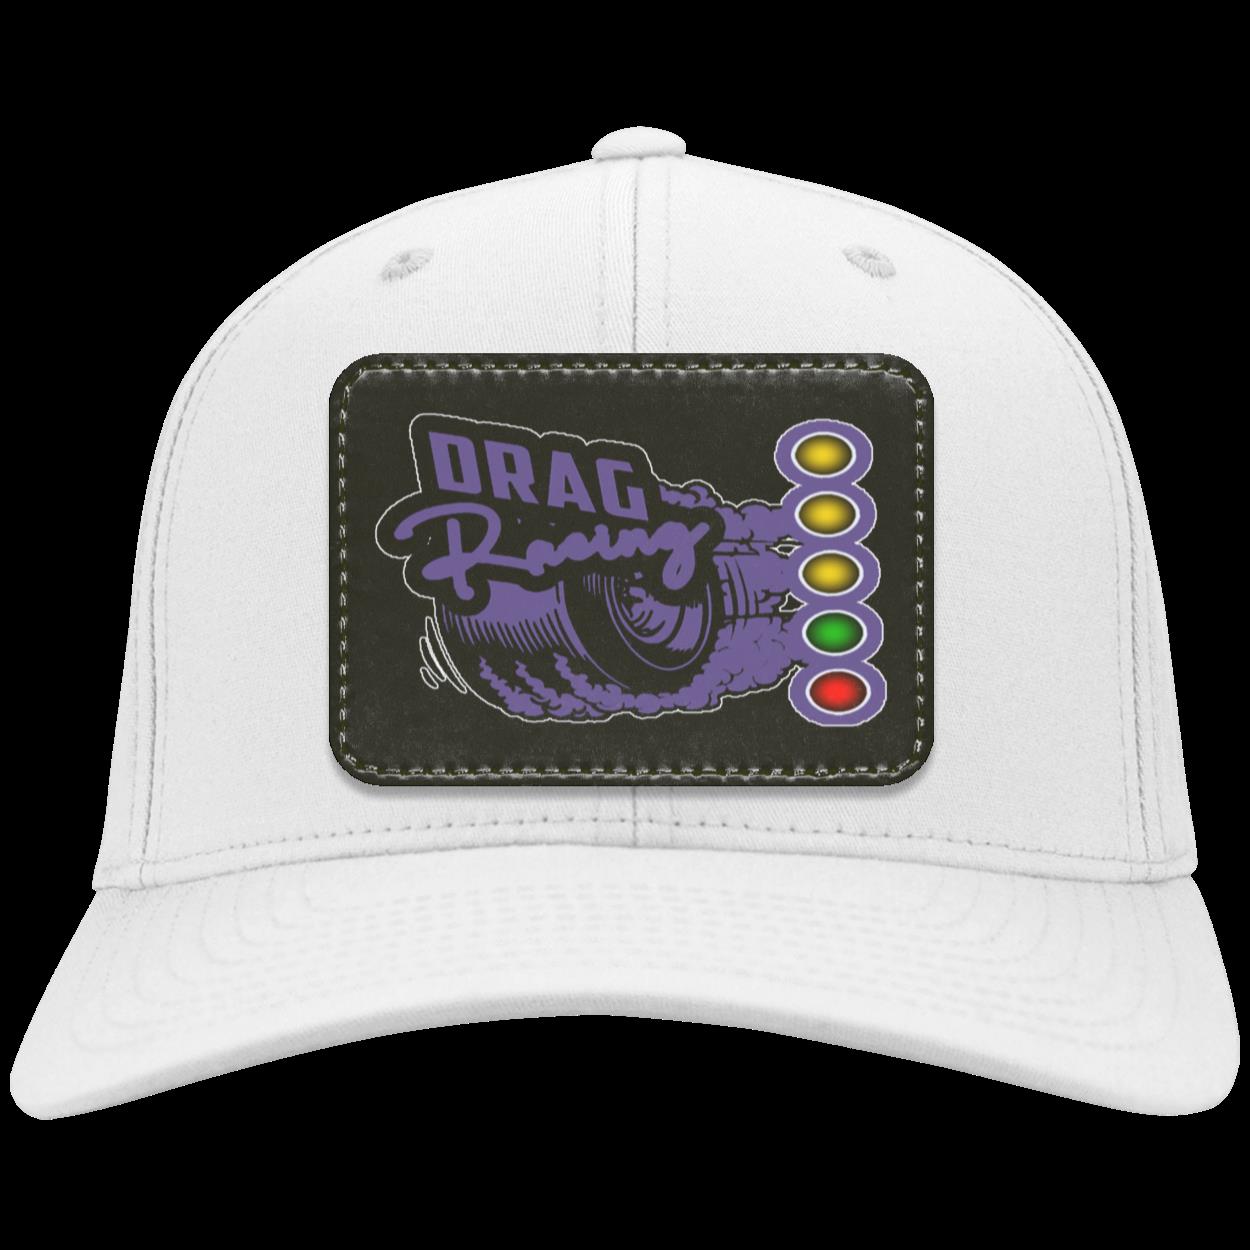 Drag Racing Patched Twill Cap V1